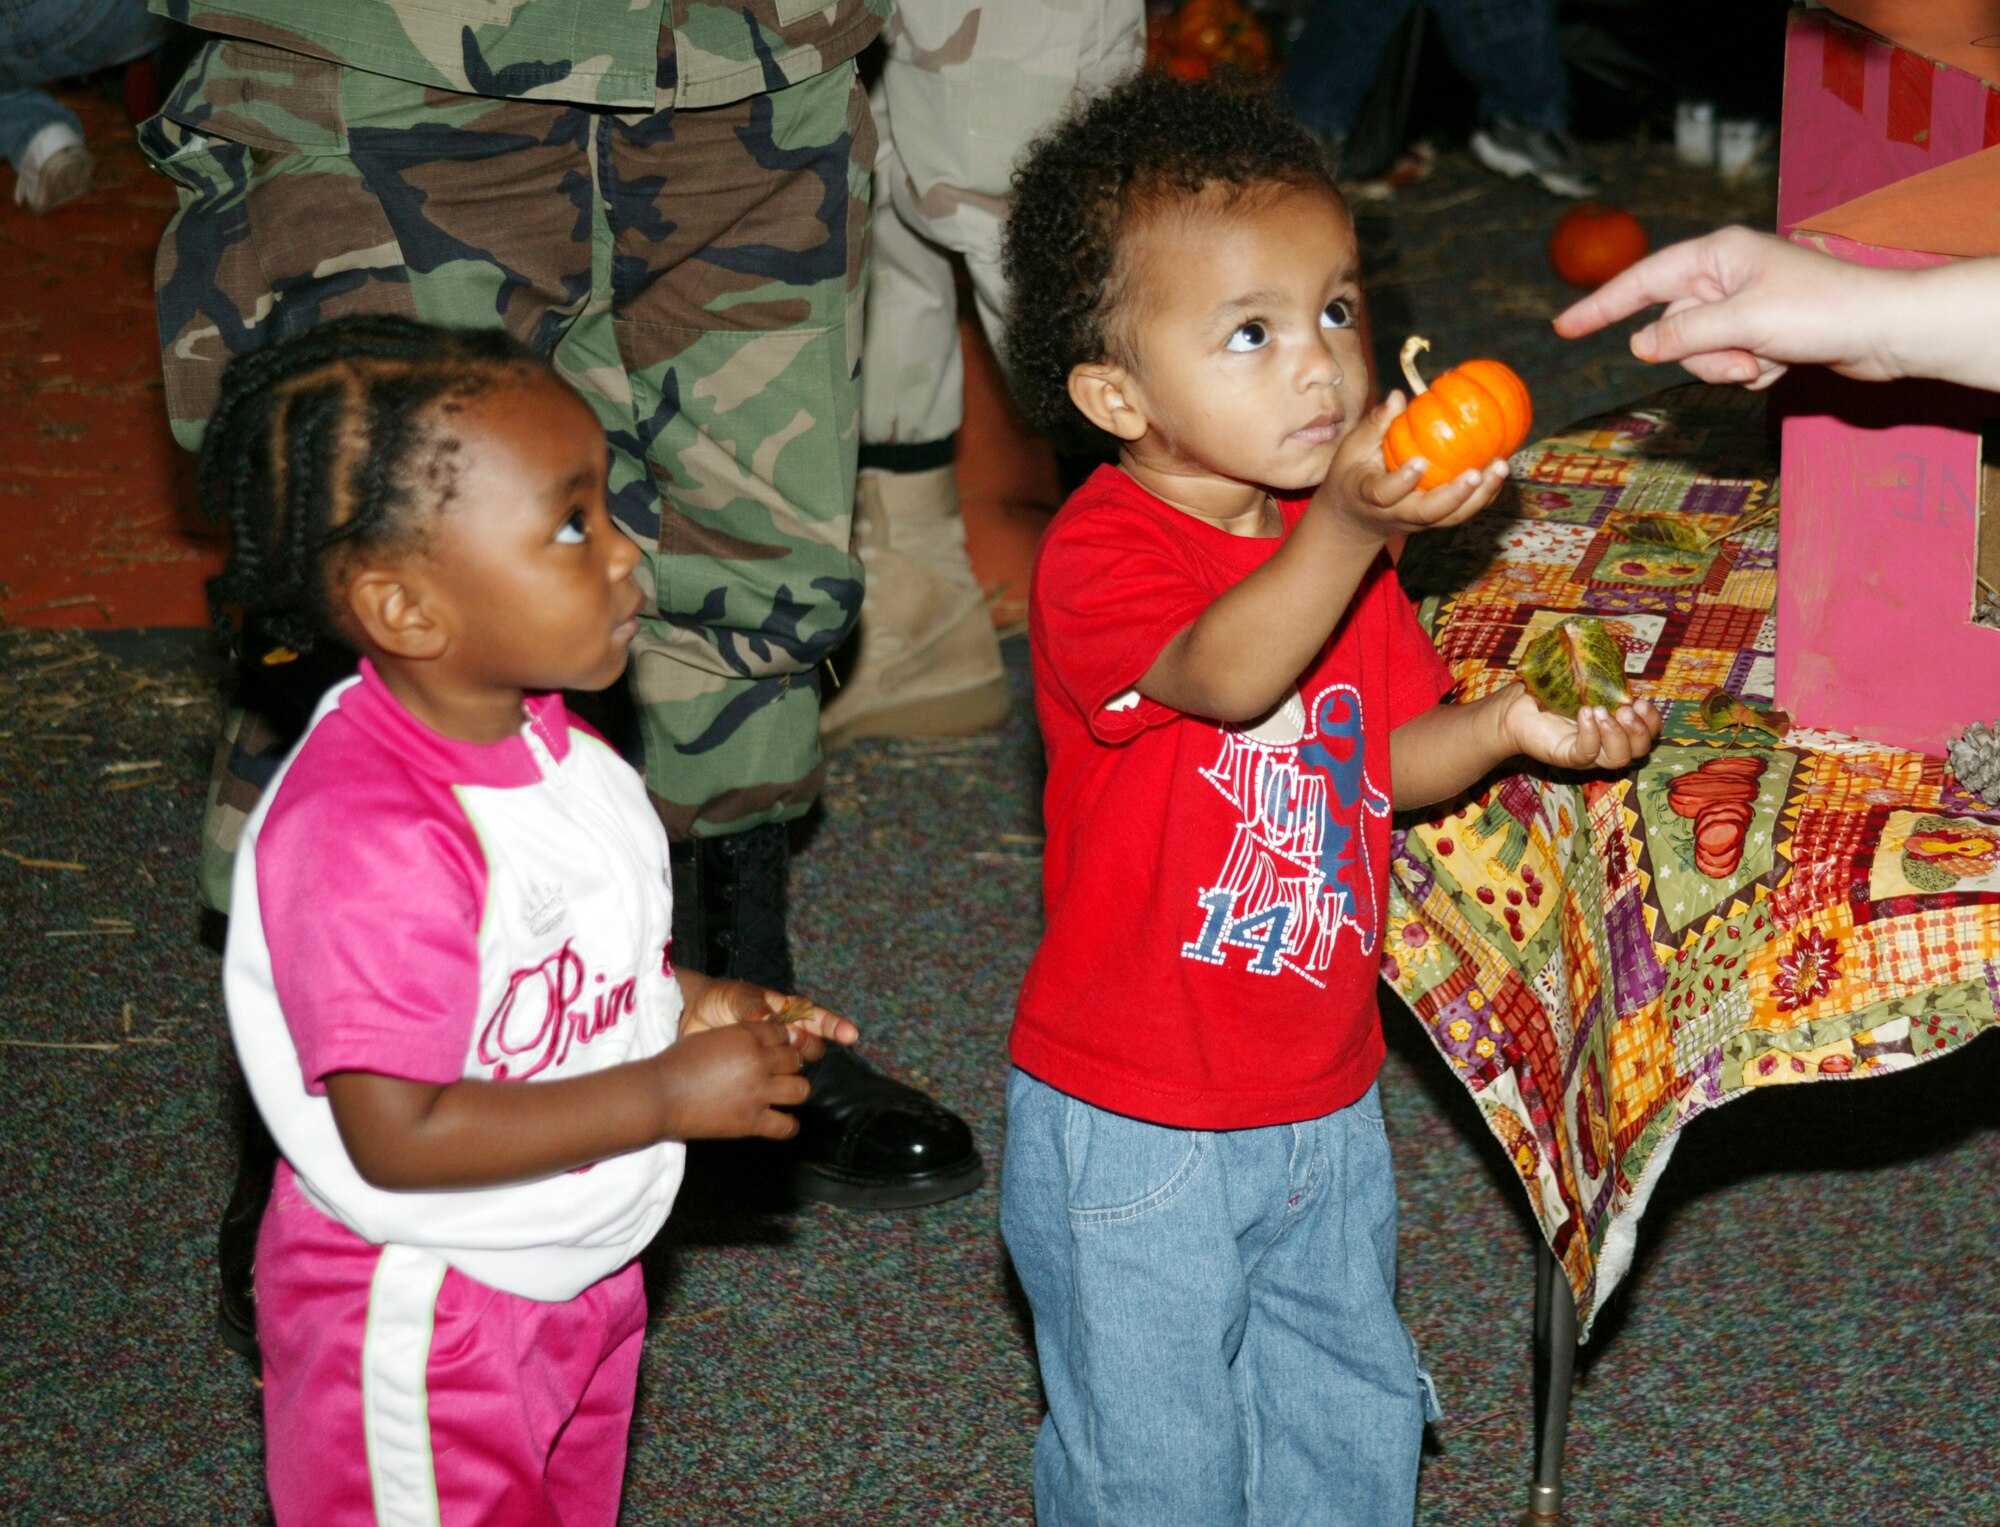 SHAW AIR FORCE BASE, S.C. -- Mitongo Bella-Bella, daughter of William and Maj. Afia Bella-Bella, 9th Air Force, and Anthony Hickmon, son of David and Tech. Sgt. Suzanne Hickmon, 20th Aerospace Medicine Squadron, participate in the Shaw CDC Harvest Fest Oct. 25. (U.S. Air Force photo/Tech. Sgt. Kevin Williams)